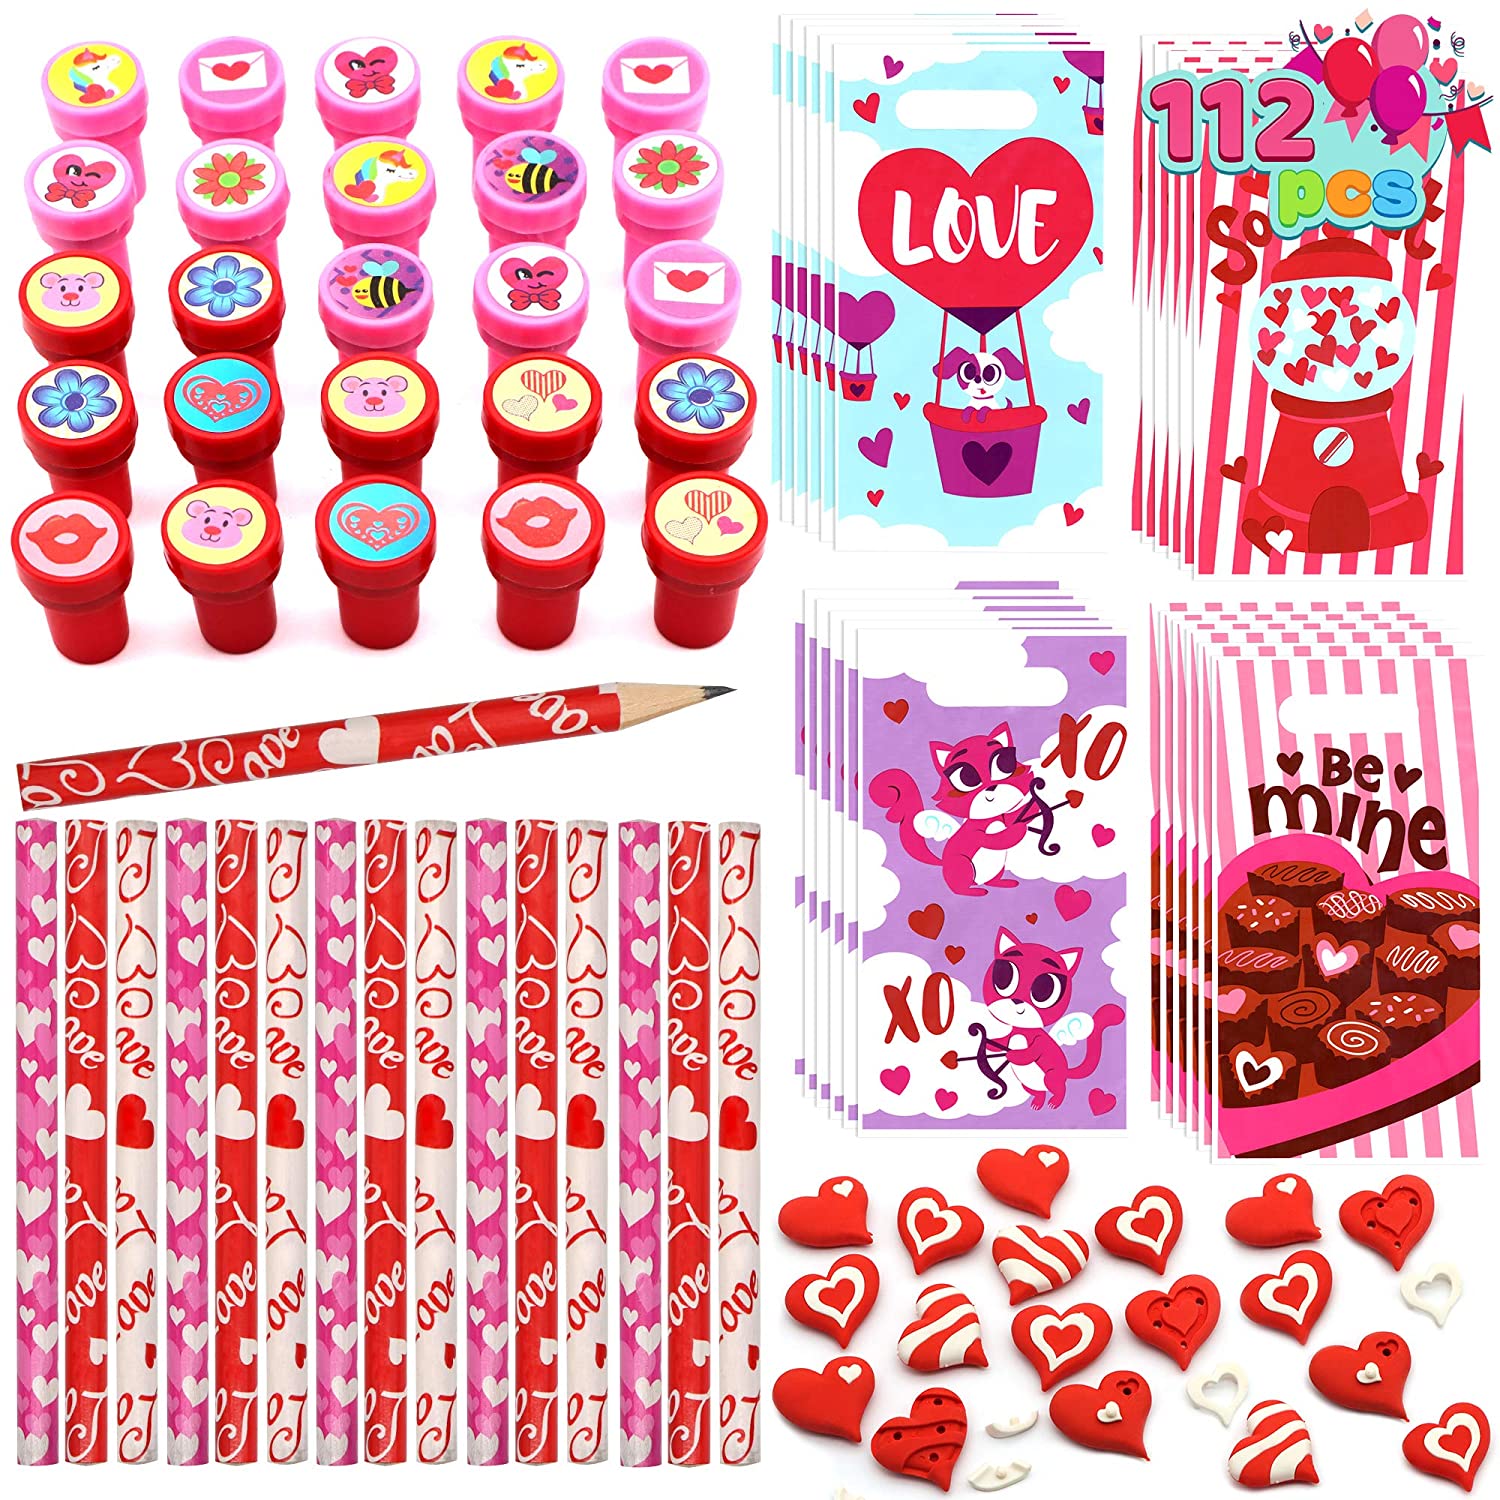 Classroom Exchange Prizes Cute Balls and Spinning Tops with Valentine Cards for Valentine Party Favors Wall Climbing Men 28 Packs Valentine Assorted Novelty Toys Includes Glasses Spring Toys 